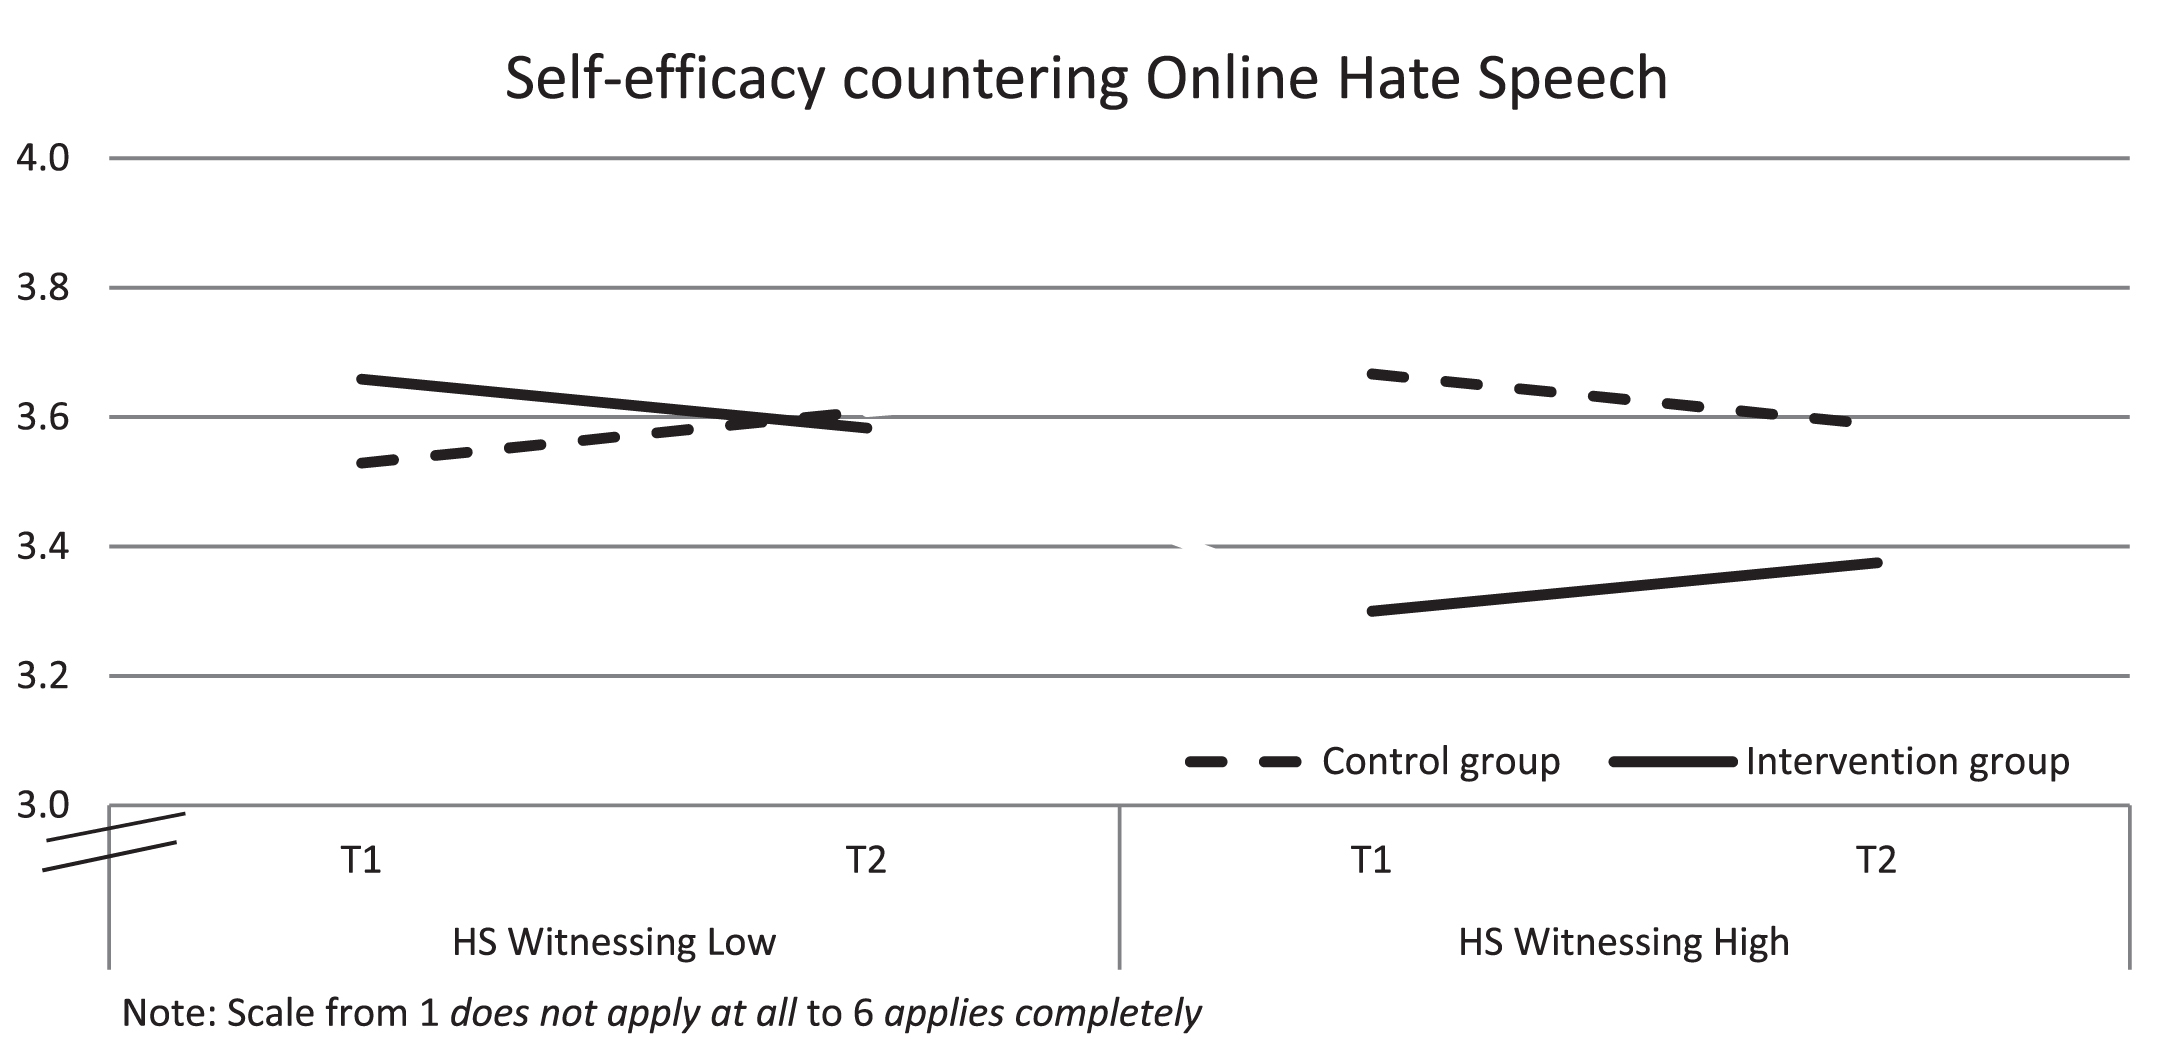 Self-efficacy Countering Online Hate Speech in Both Groups Depending on the Frequency of Witnessing Online Hate Speech